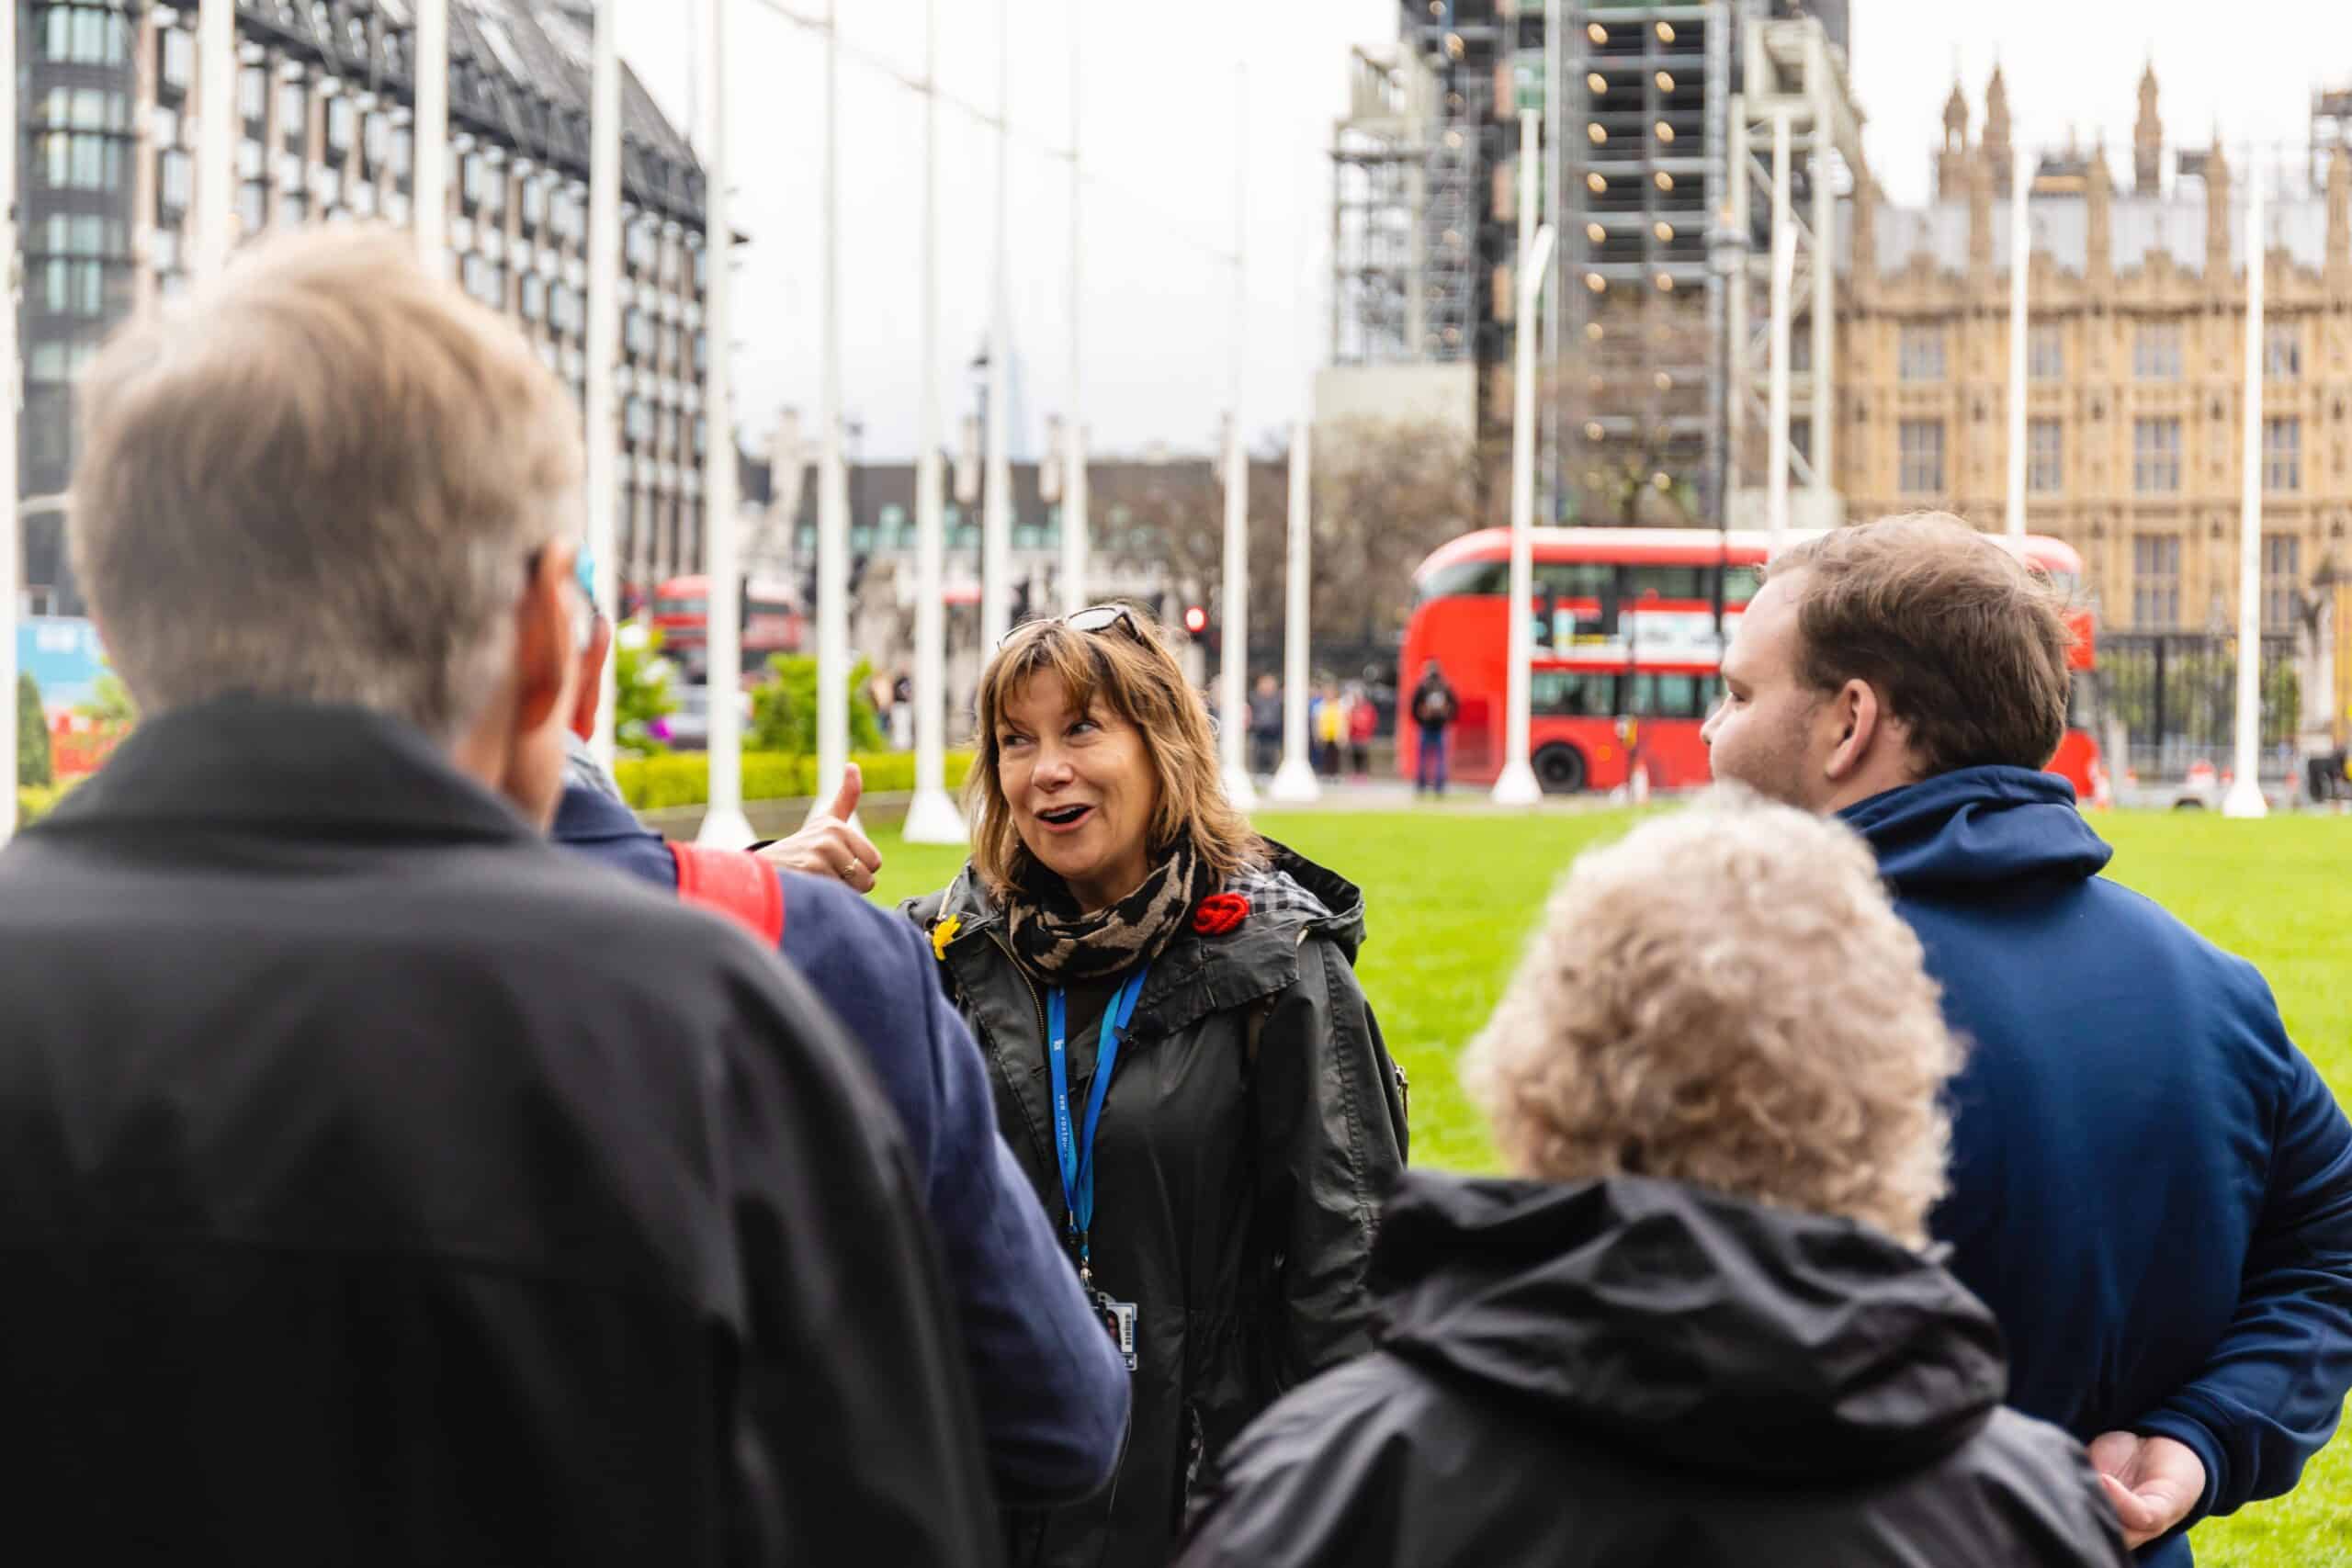 A guide leads a group through London, England